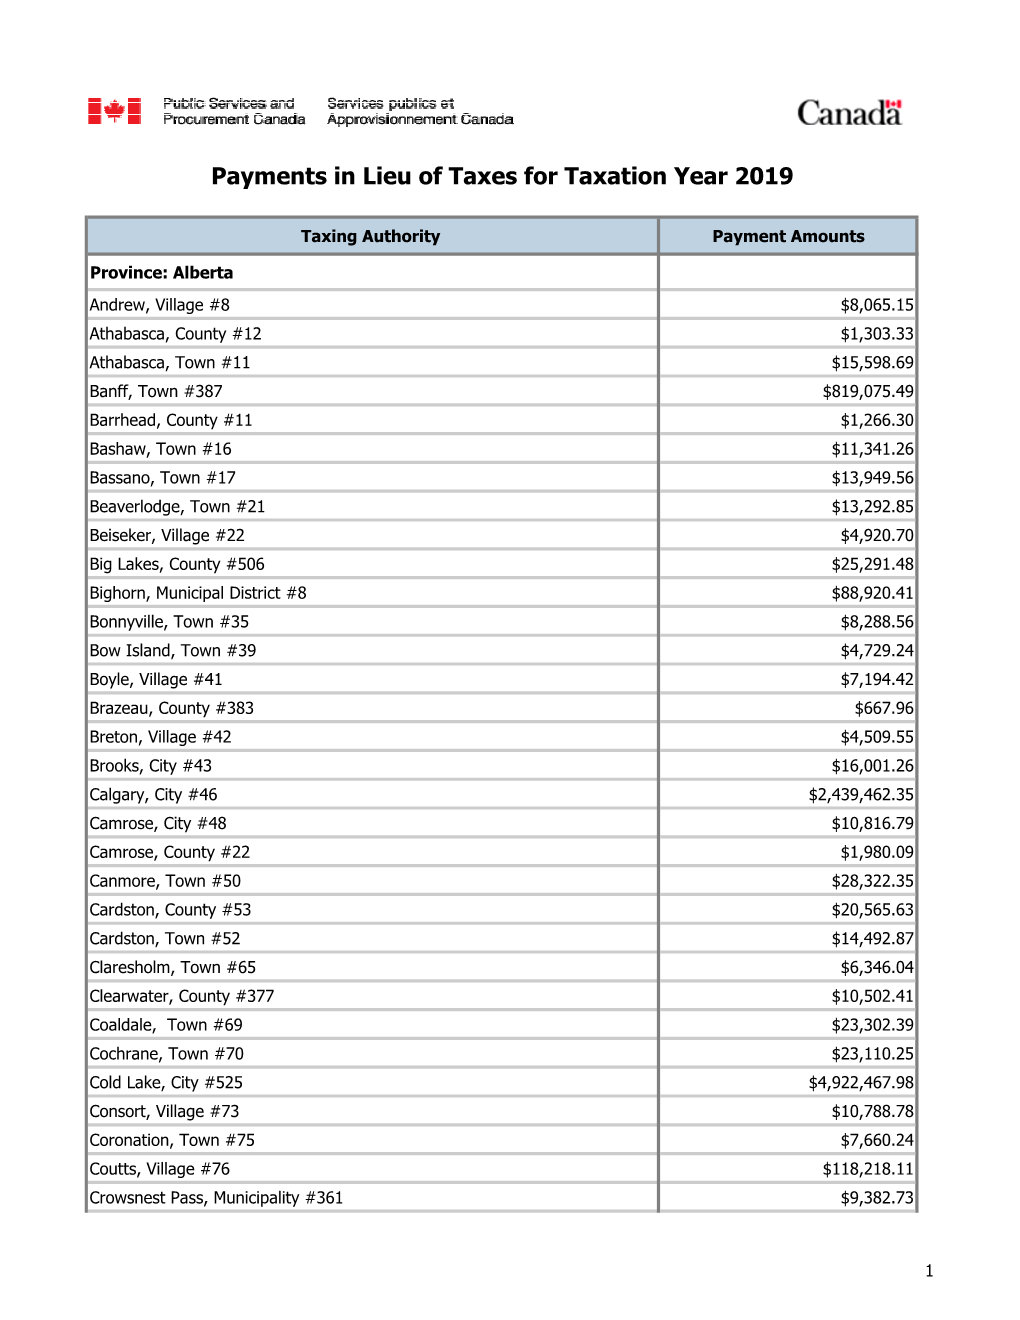 Payments in Lieu of Taxes for Taxation Year 2019